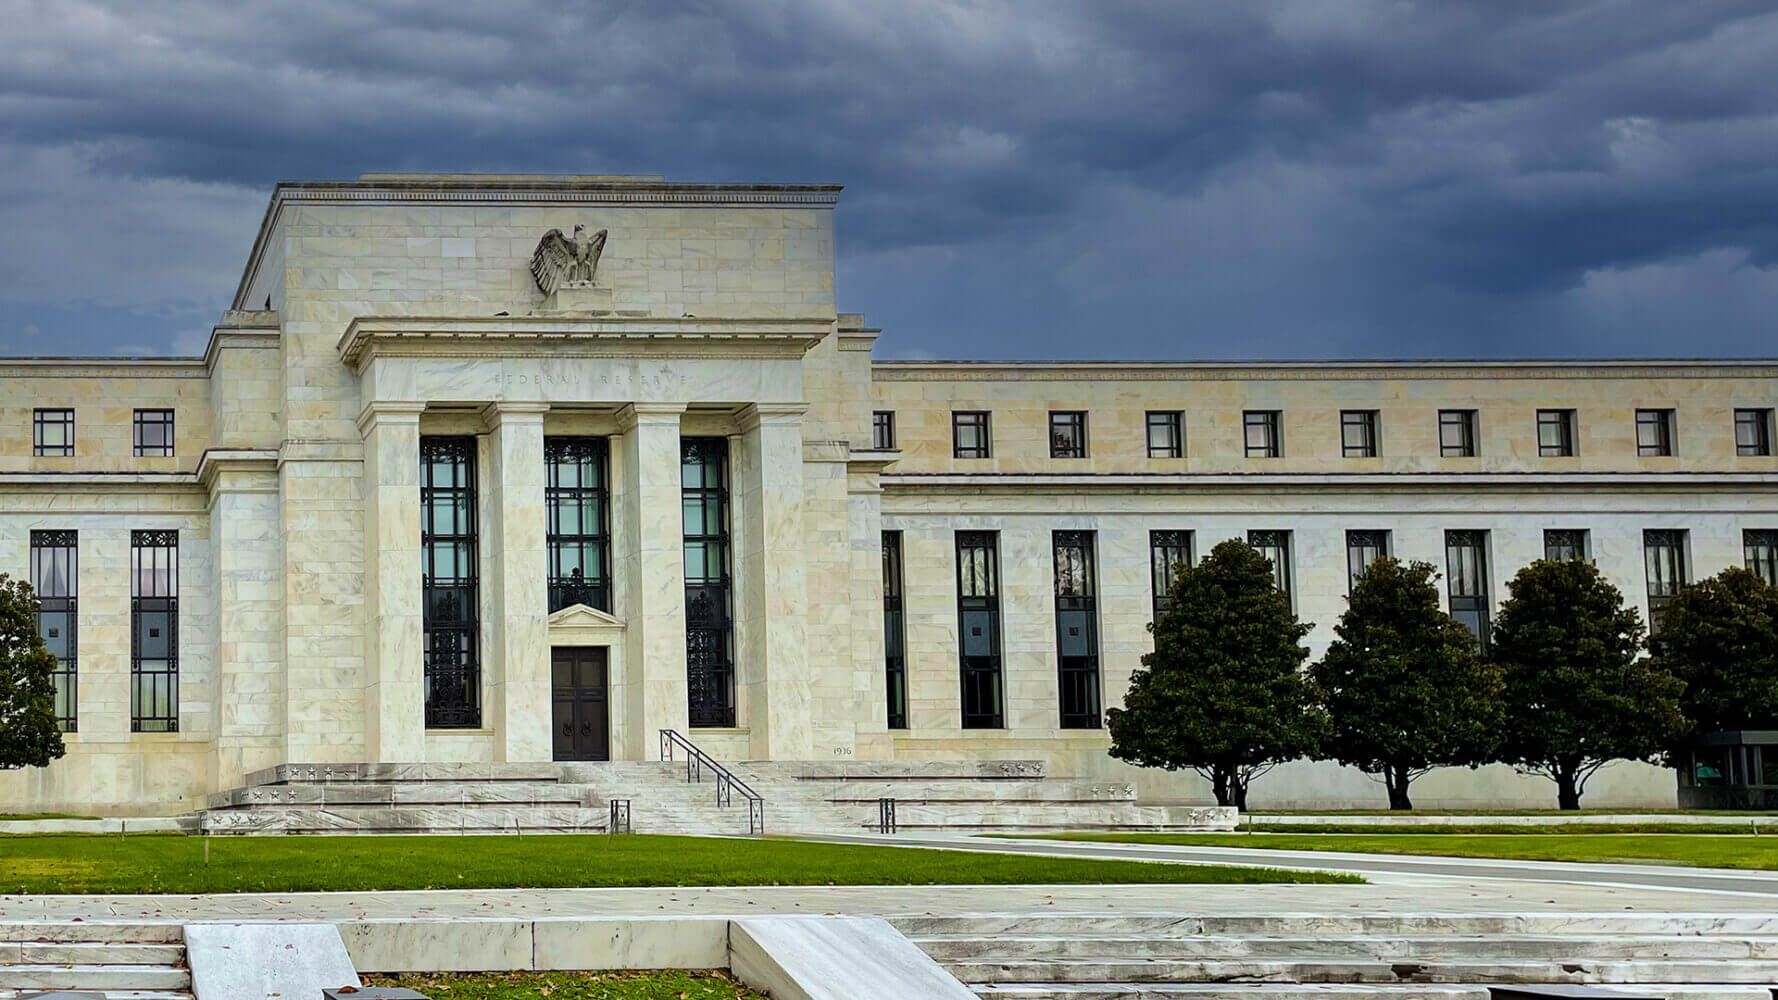 The Federal Reserve building stands tall and stark in contrast to a stormy background.